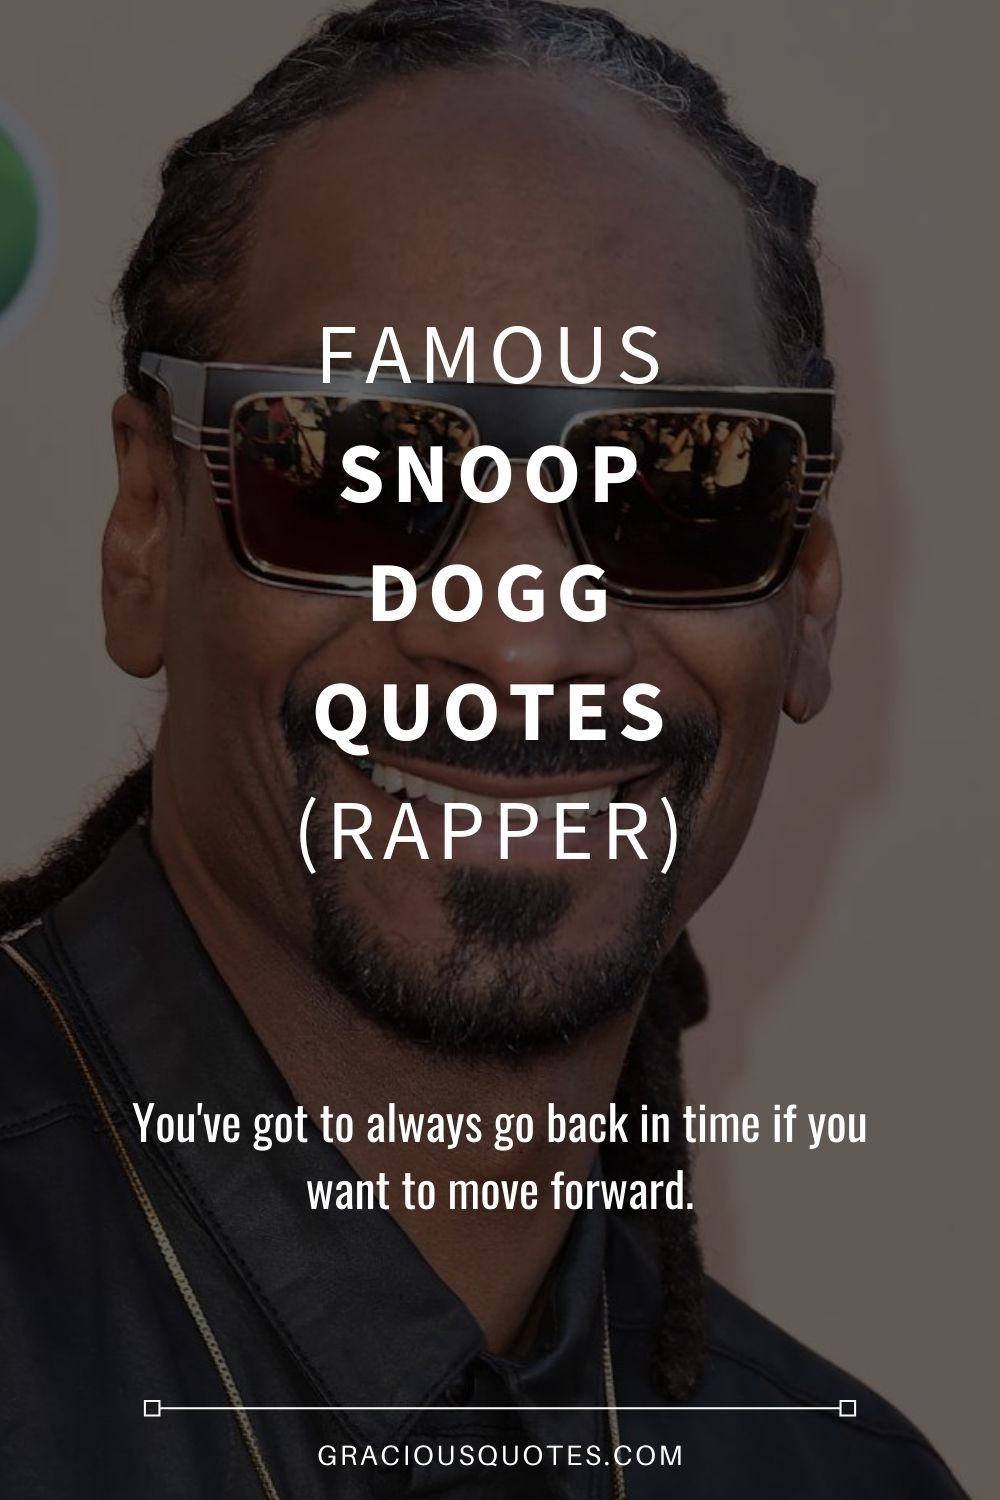 7 Famous Snoop Dogg Quotes